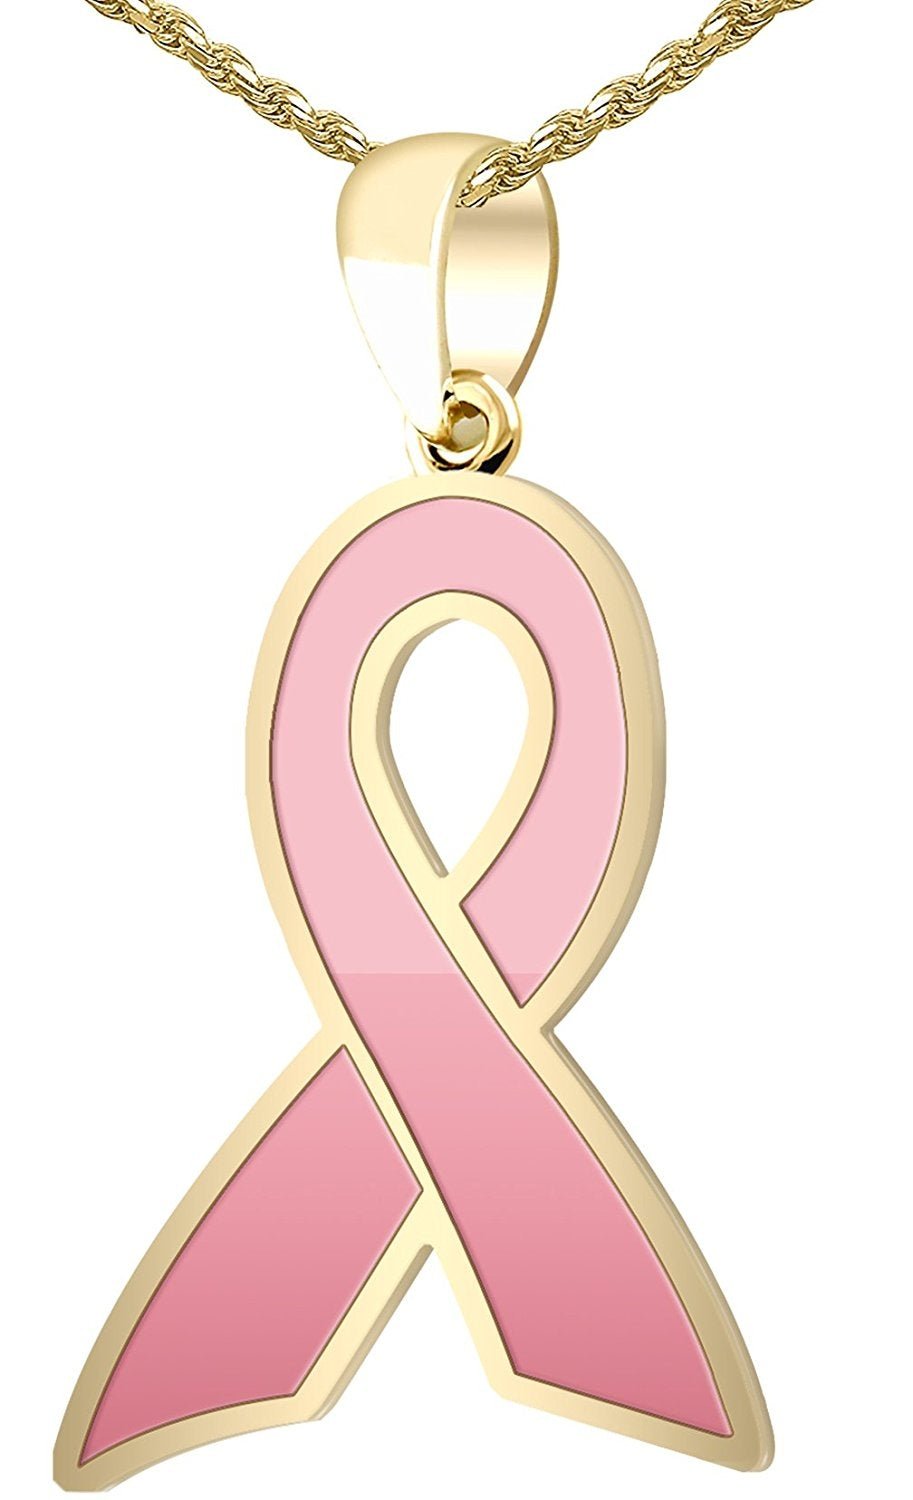 14k Yellow Gold Cancer Ribbon Polished Finish 1.125in Pendant Necklace - US Jewels